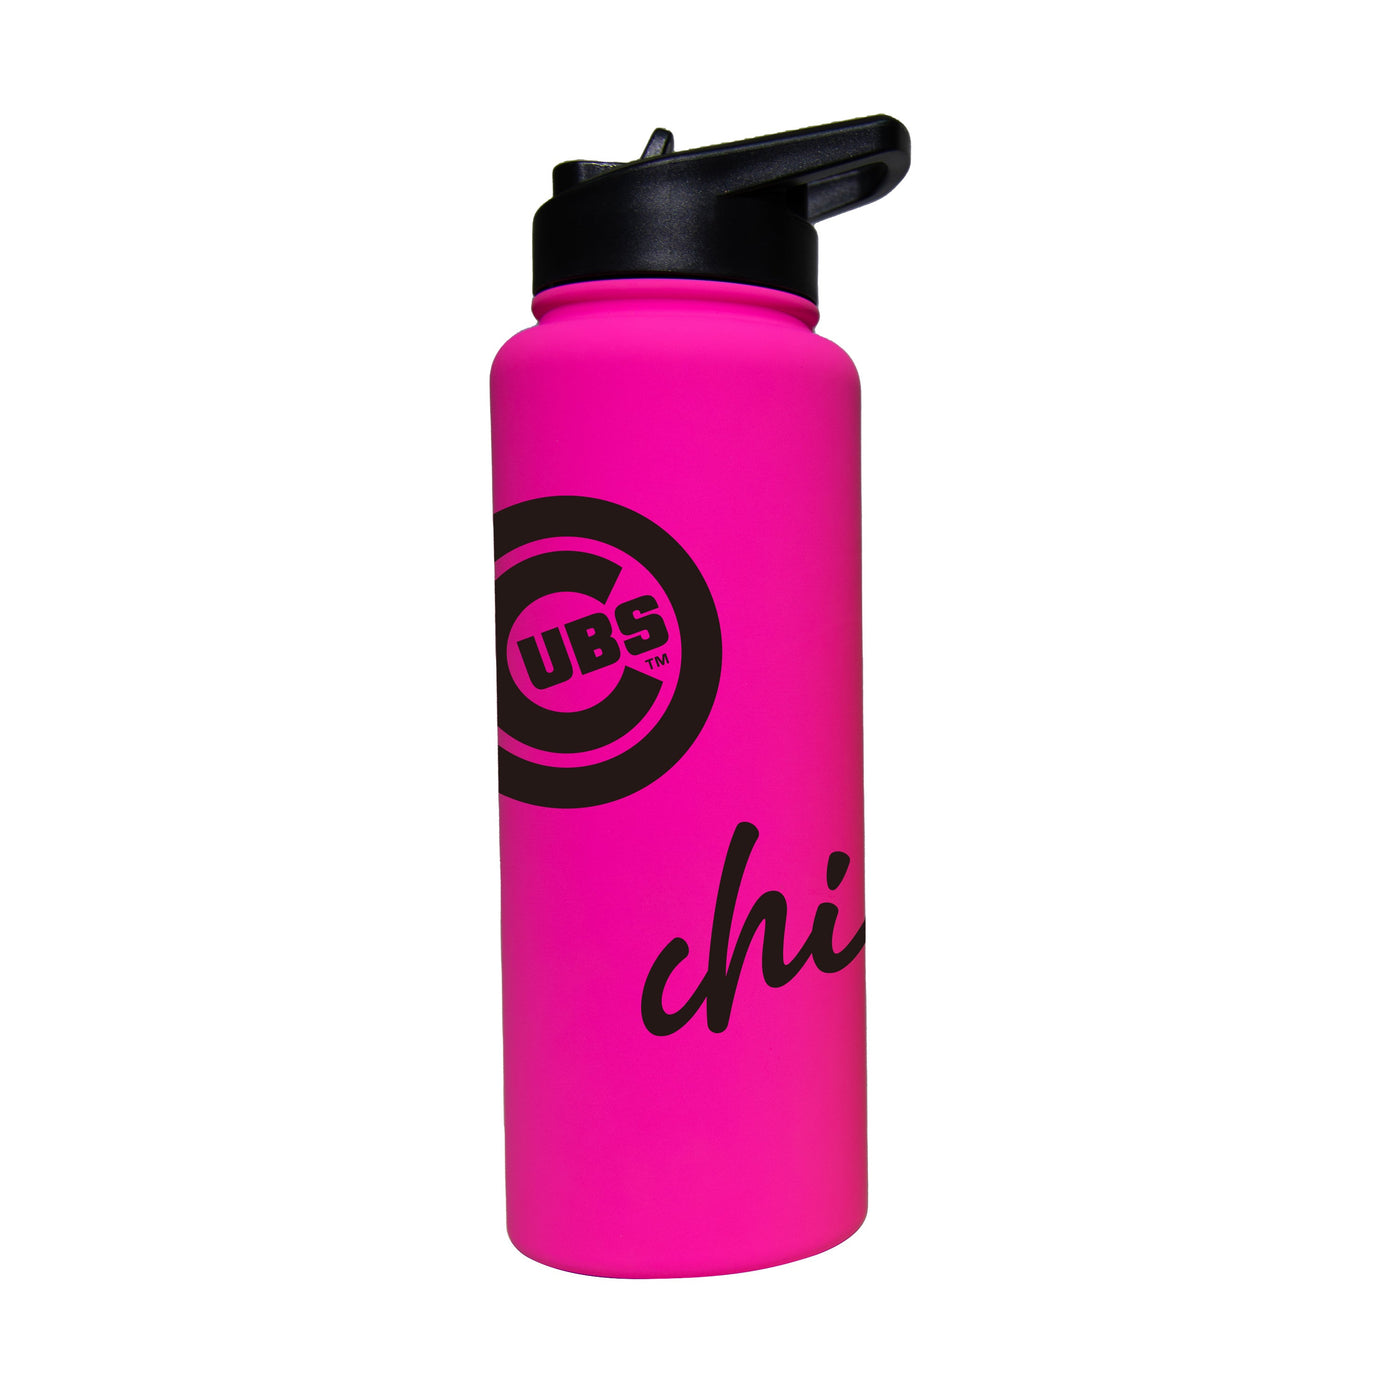 CHICAGO CUBS LOGO BRAND ELECTRIC PINK WATER BOTTLE